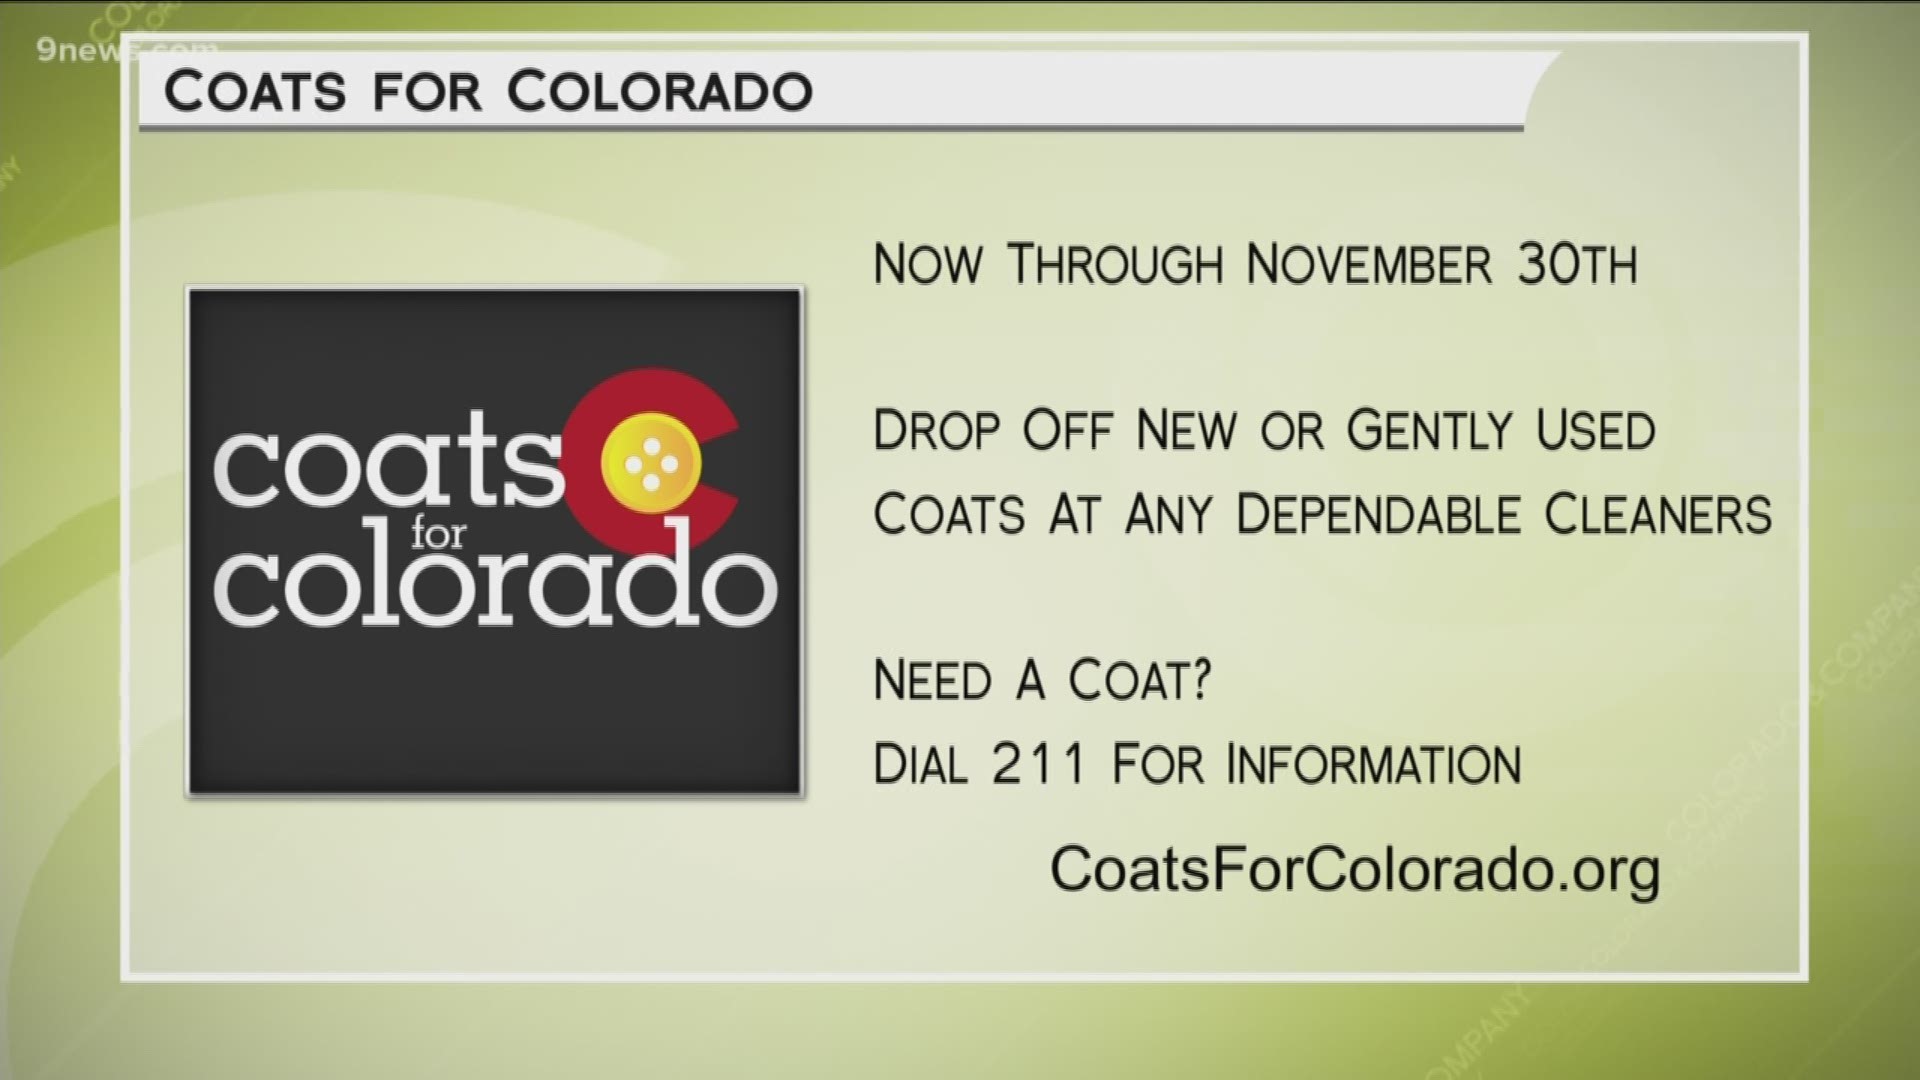 Donate your new or gently used coats to any Dependable Cleaners location and help families stay warm this winter. Learn more at www.CoatsForColorado.org.